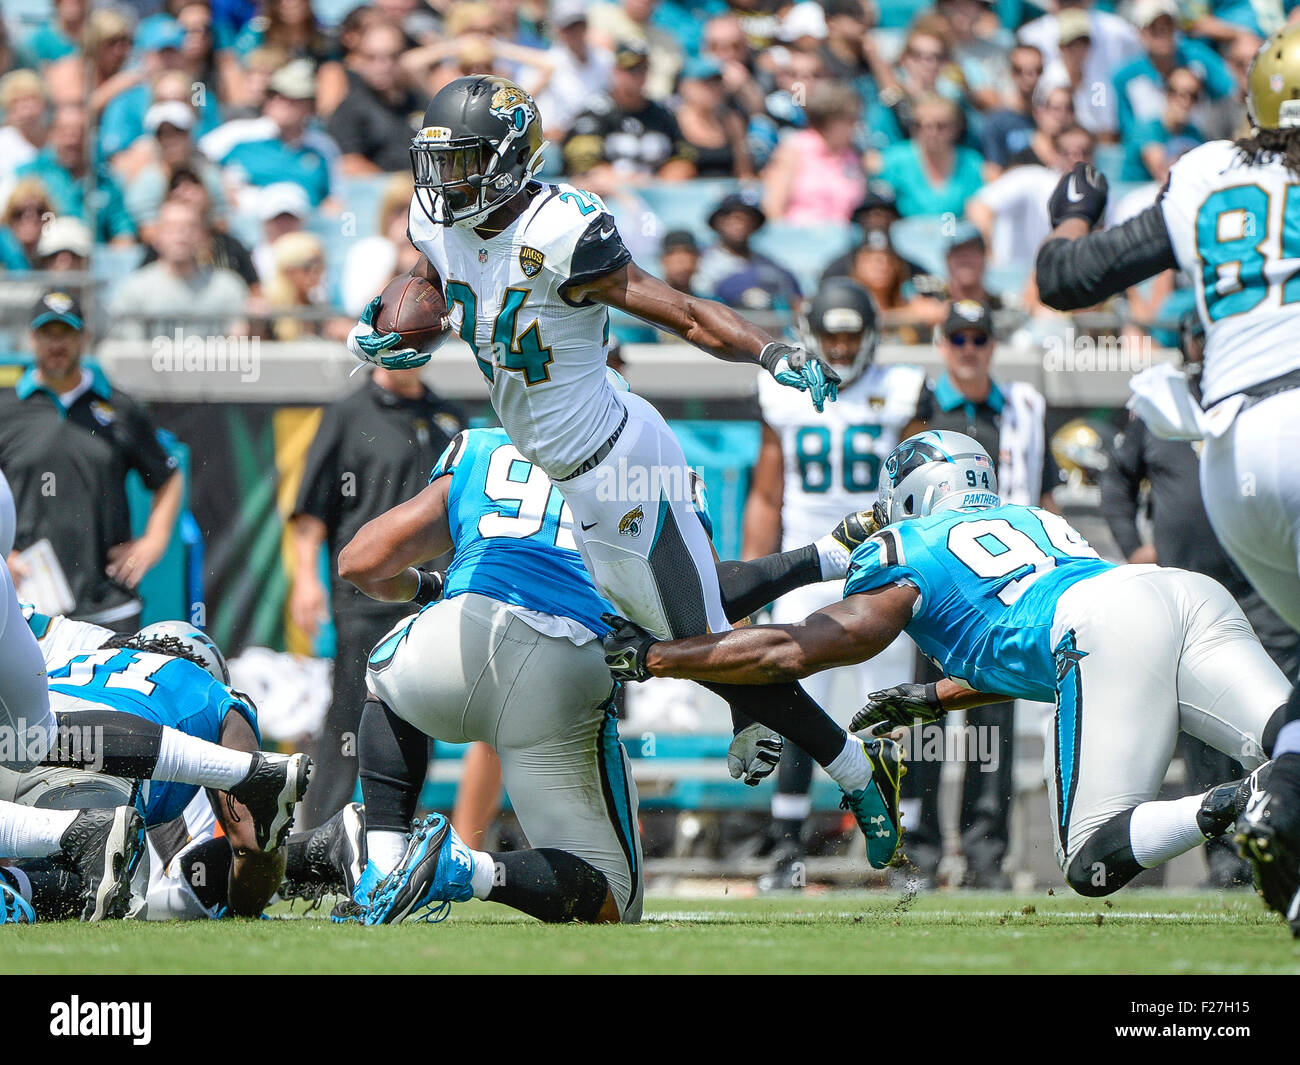 Jacksonville, FL, USA. 13th Sep, 2015. Jaguars running back T.J. Yeldon (24) leaps over the arms of Panthers defensive end Kony Ealy (94) for extra yrads during 1st half NFL game action between the Carolina Panthers and the Jacksonville Jaguars at EverBank Field in Jacksonville, Fl. Romeo T Guzman/CSM. © csm/Alamy Live News Stock Photo